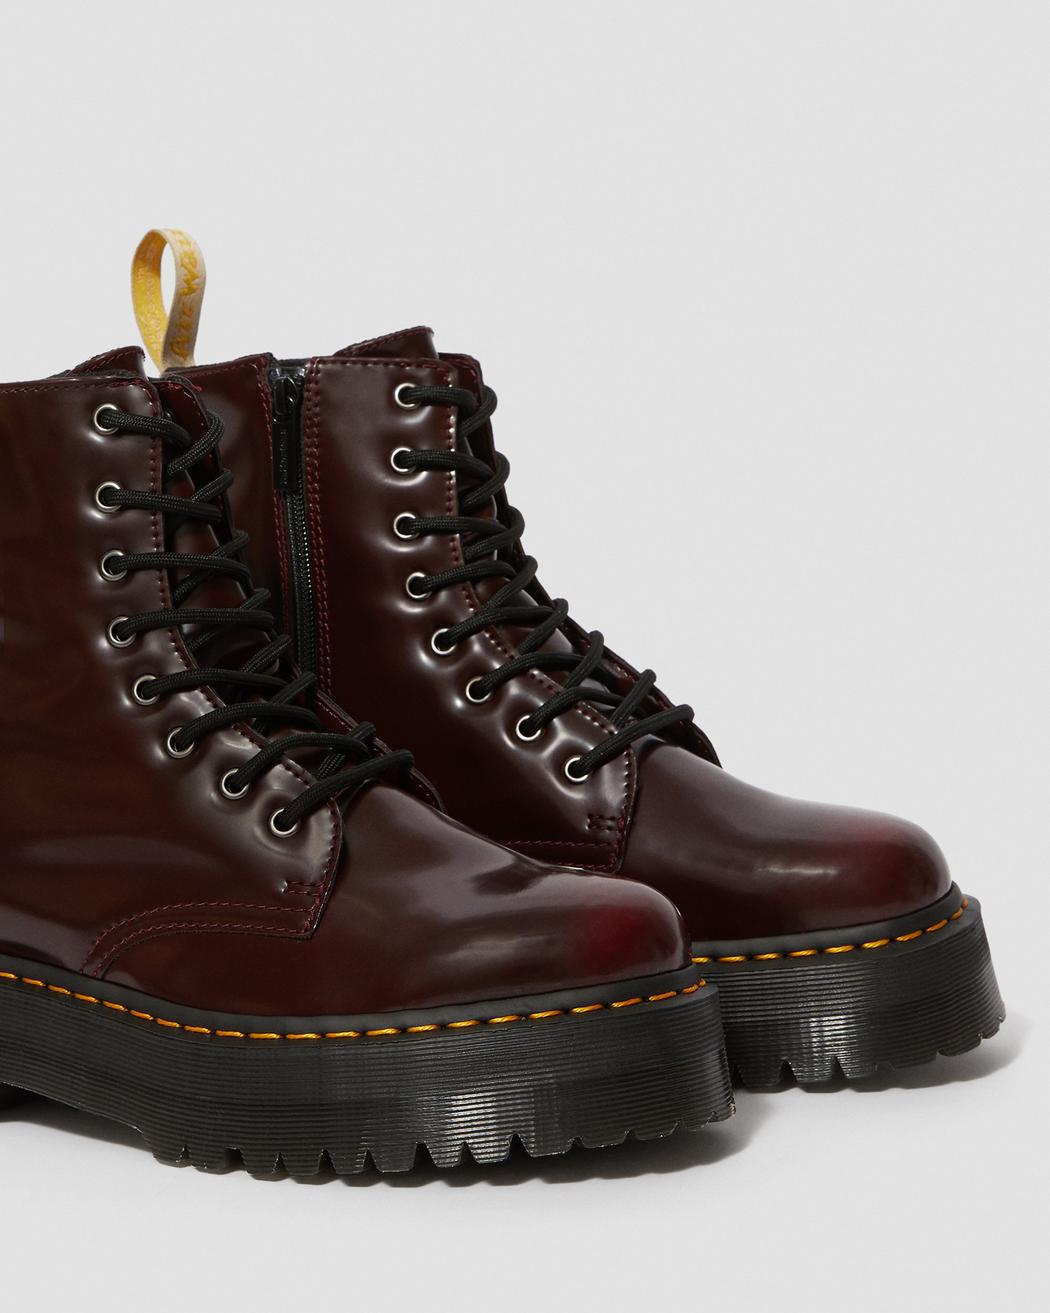 How To Style Doc Martens—Dr. Martens Outfit Ideas | HelloGiggles